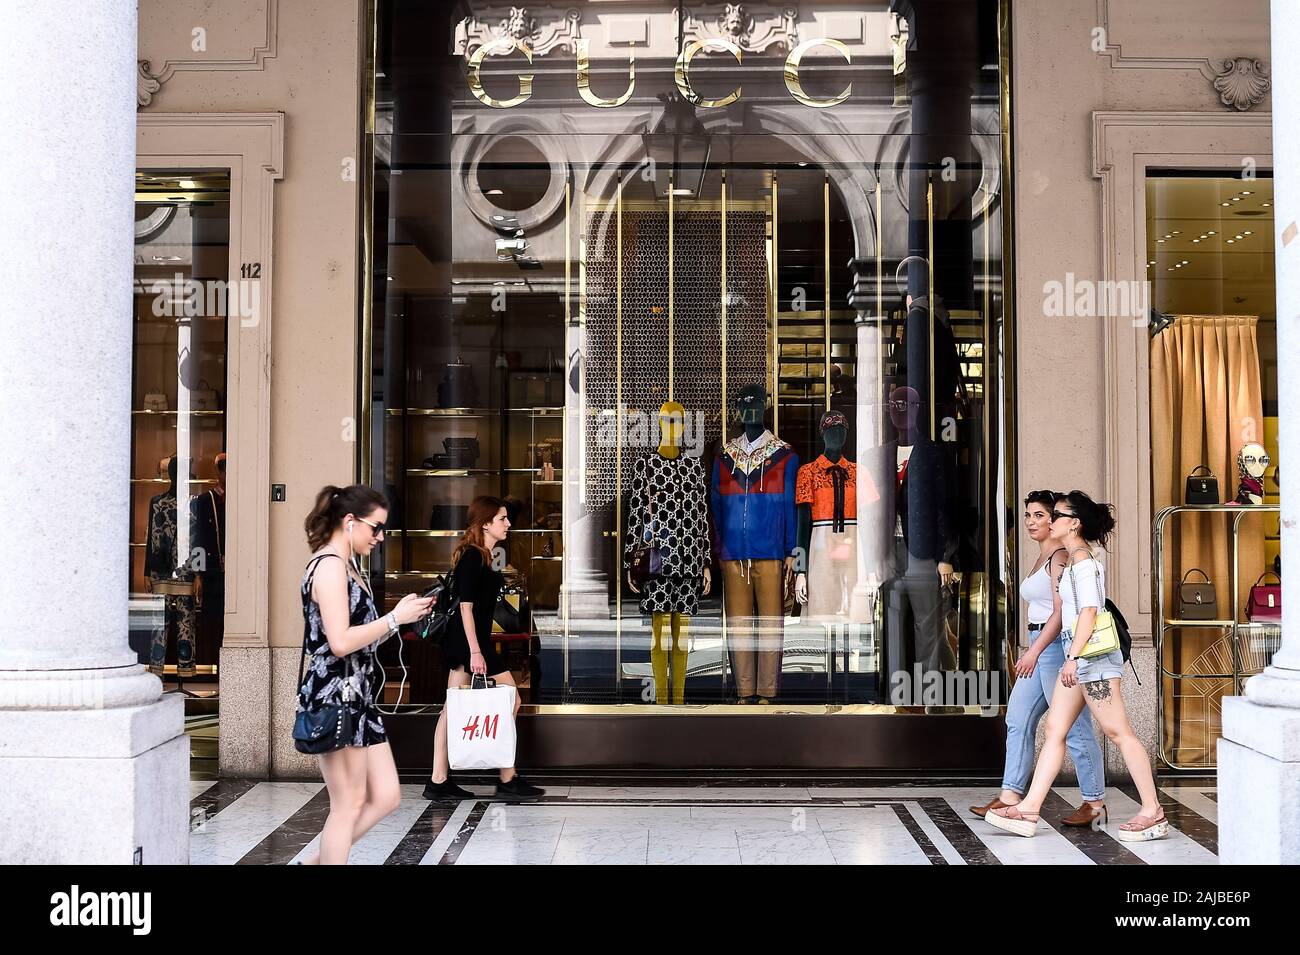 Turin, Italy - 03 July, 2019: People walk near the Gucci store in Turin.  Credit: Nicolò Campo/Alamy Live News Stock Photo - Alamy